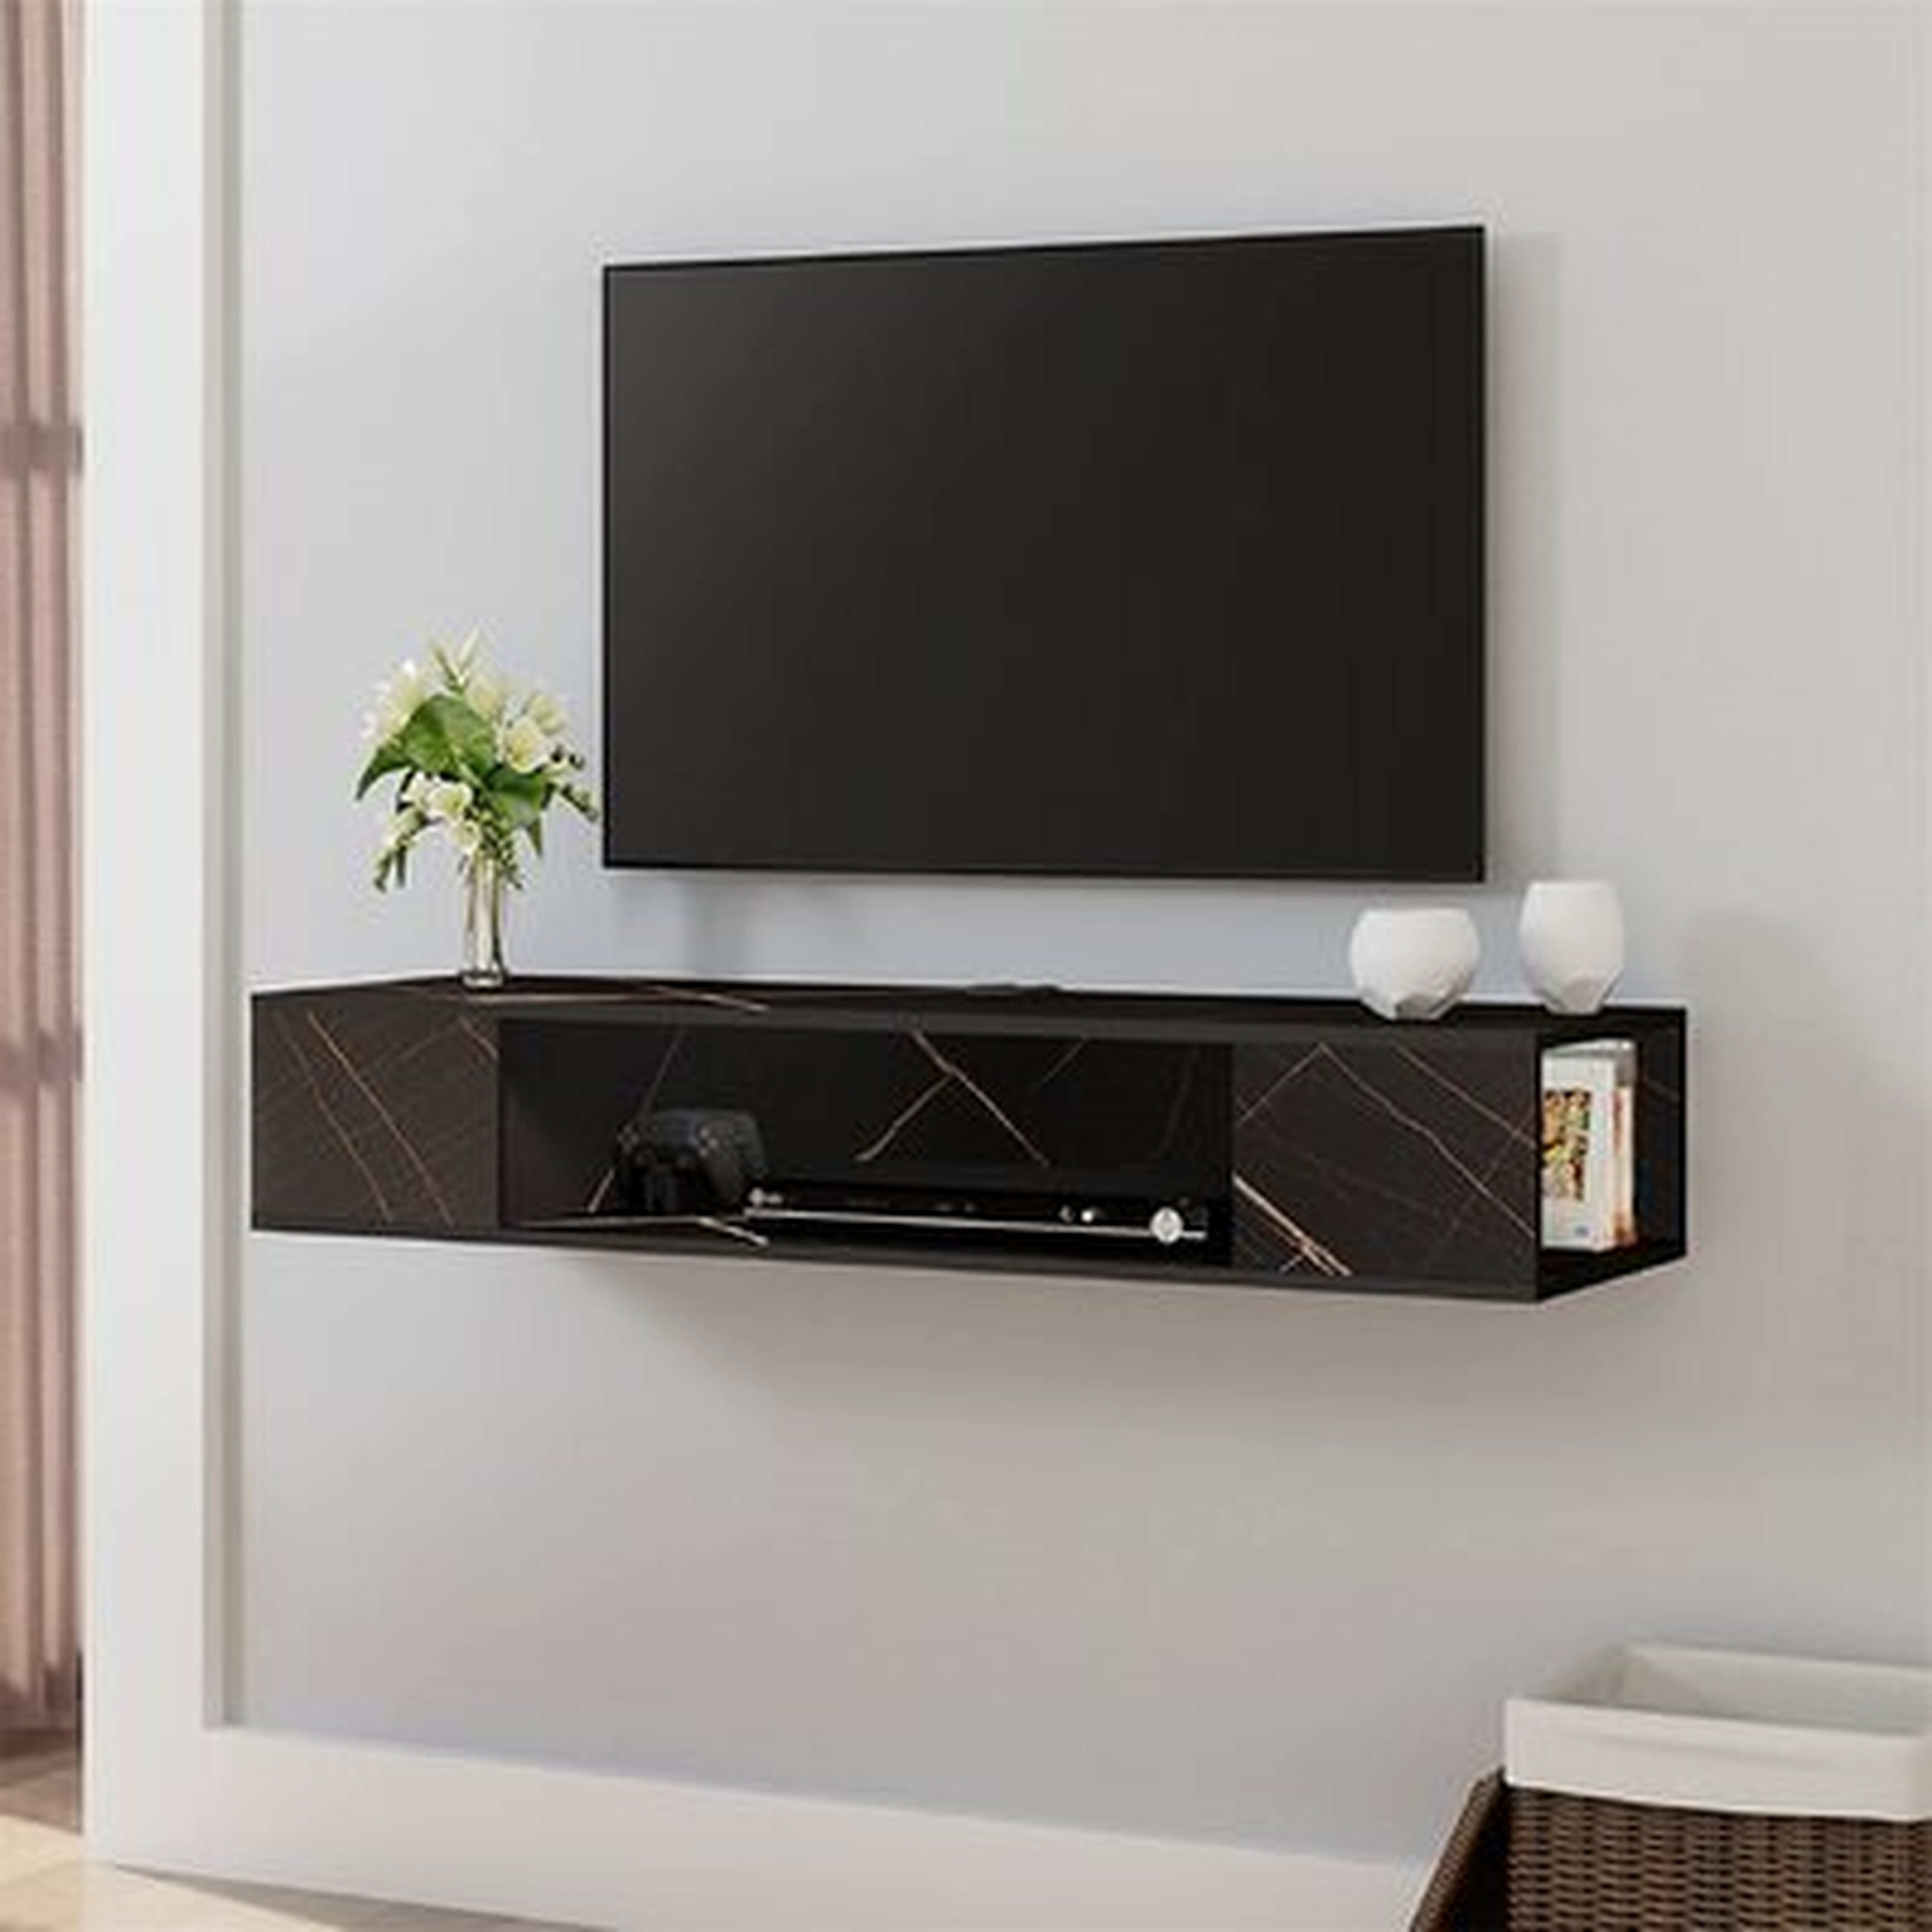 Nosay Floating TV Stand for TVs up to 55" - Wayfair